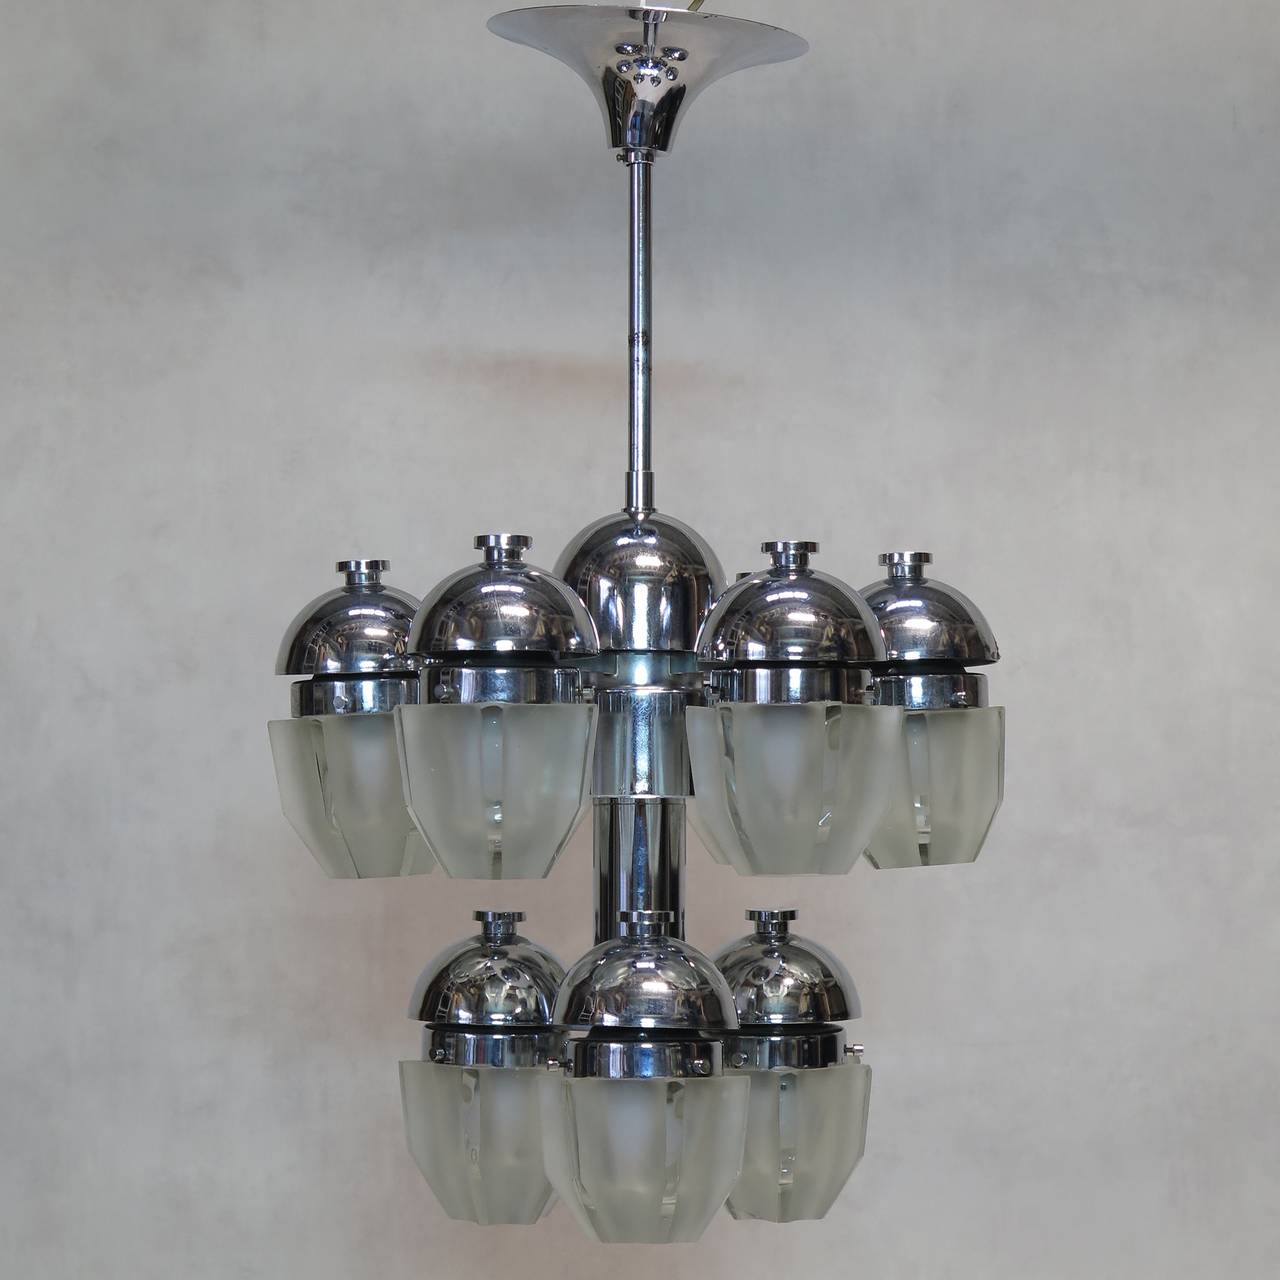 Nine-light chandelier with a chromed structure and very thick cut-glass shades.